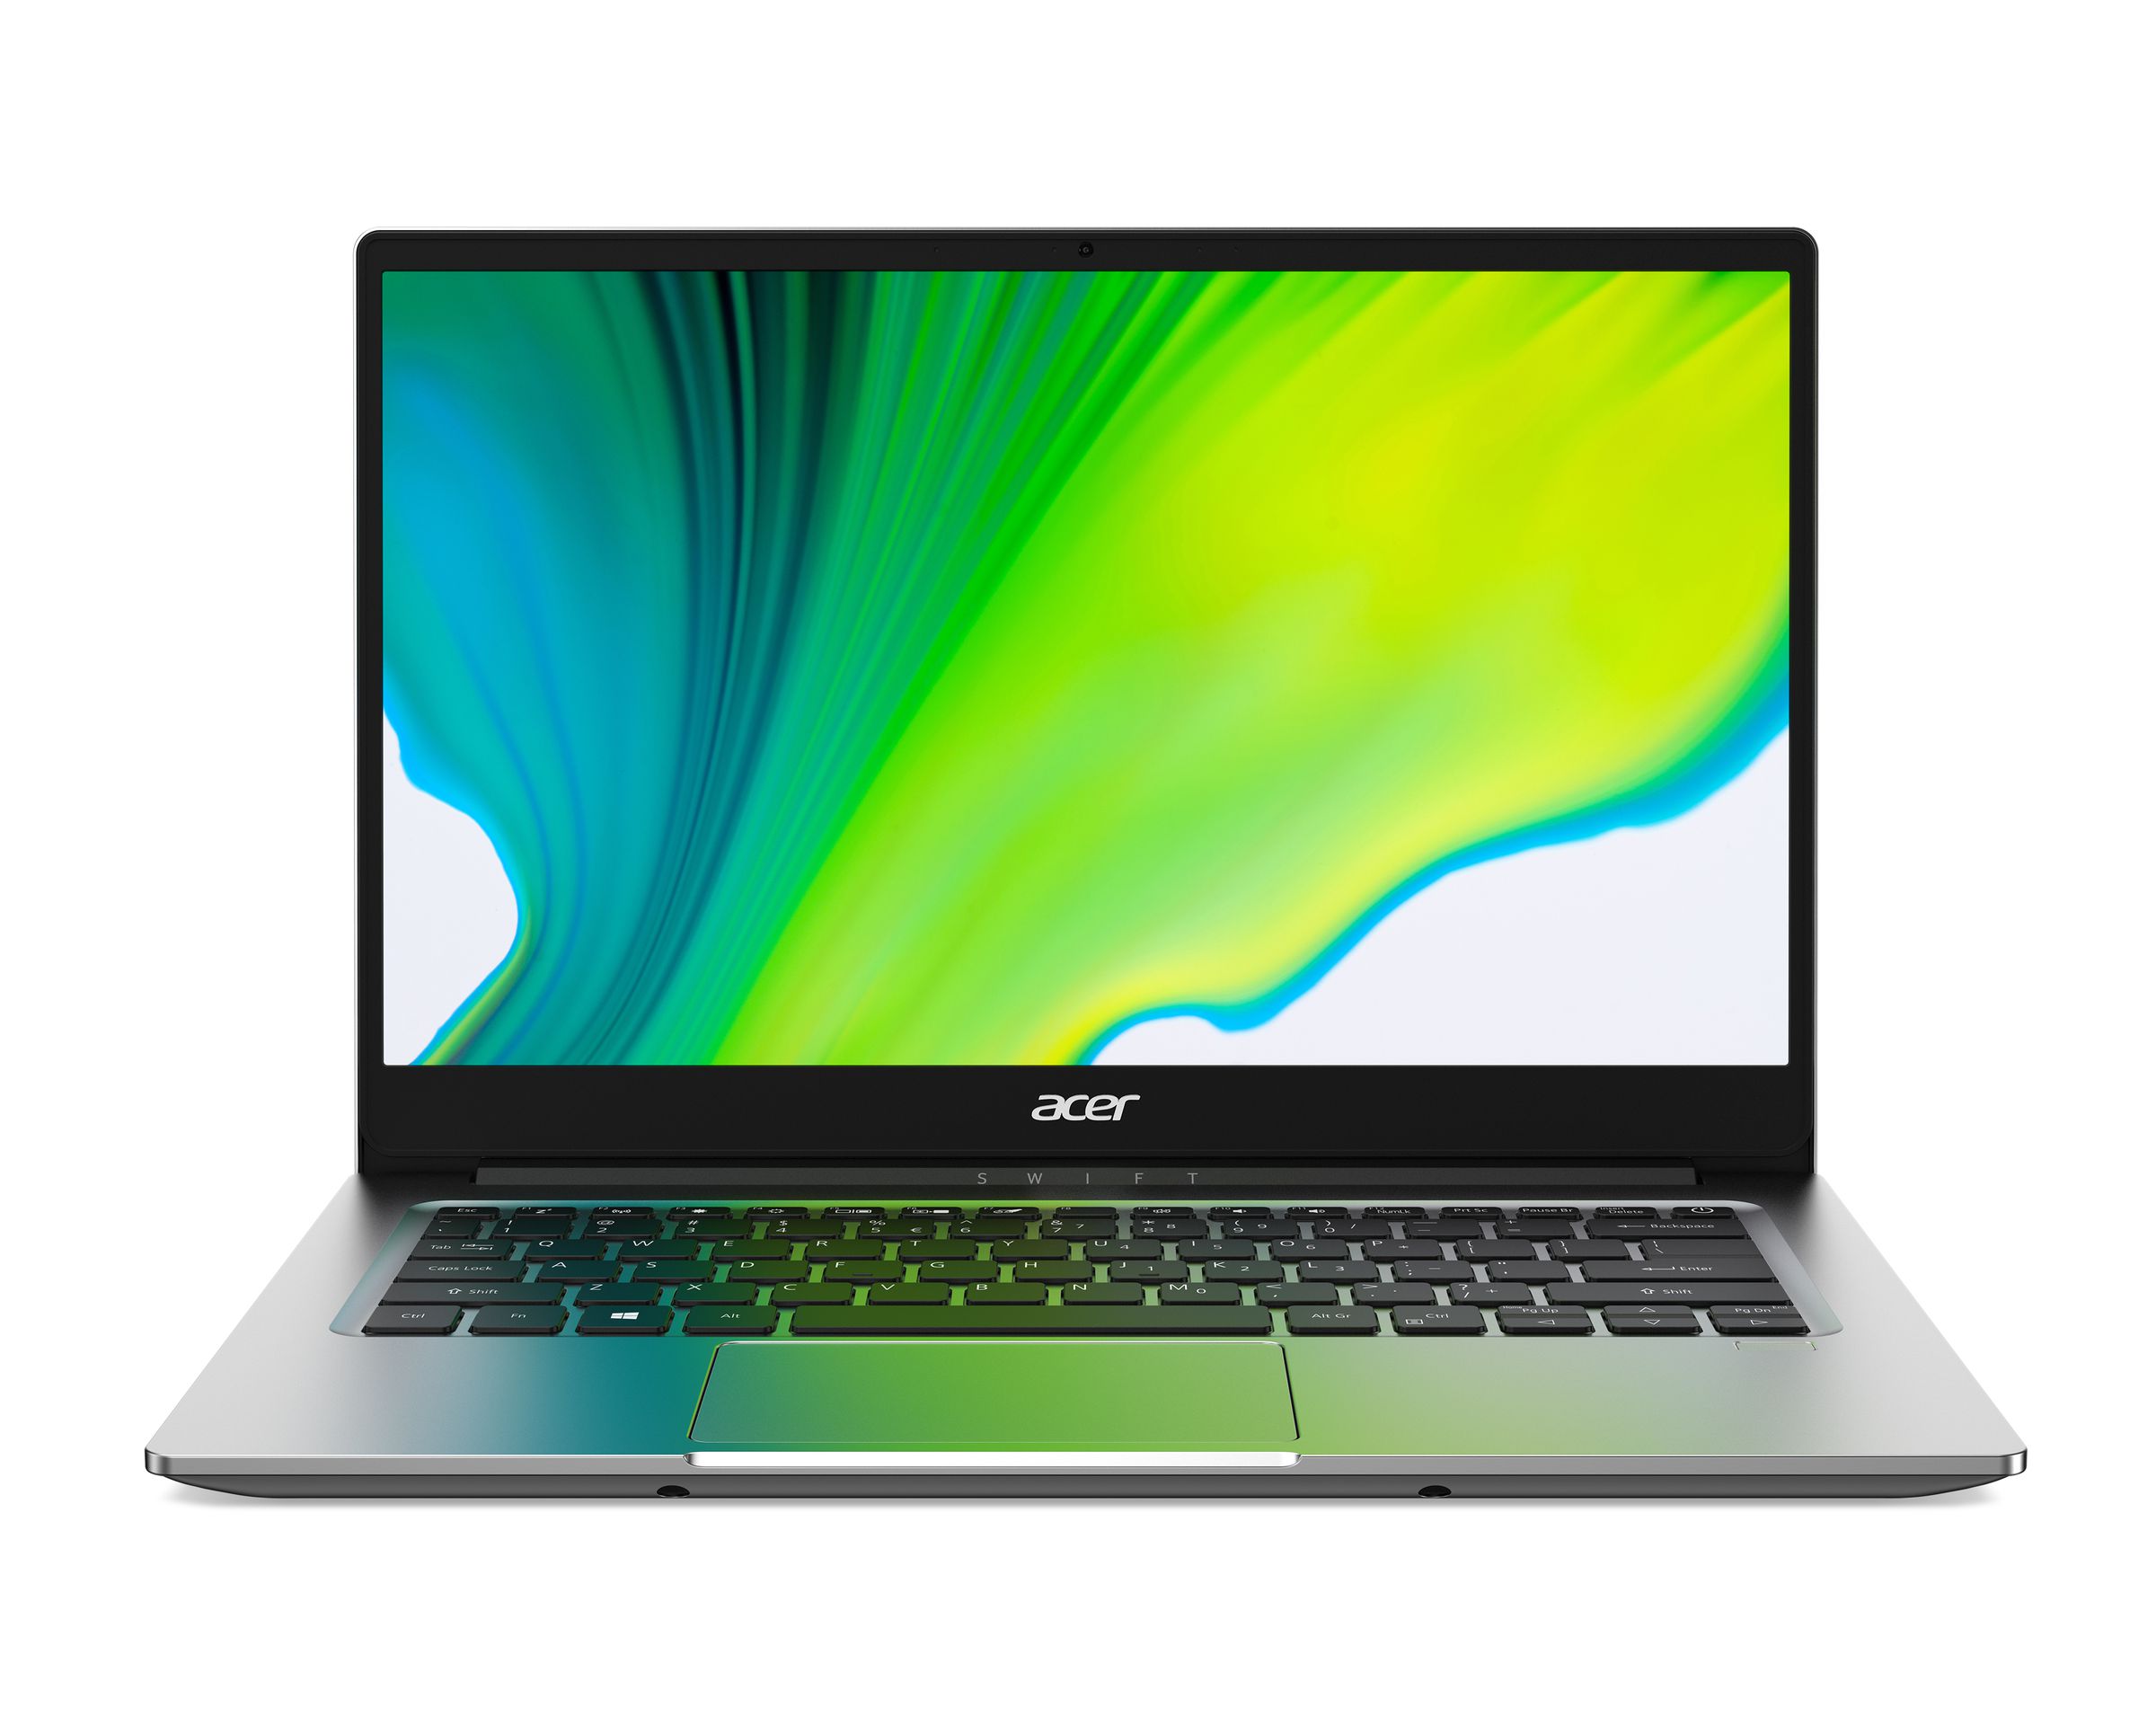 The upcoming Acer Swift 3